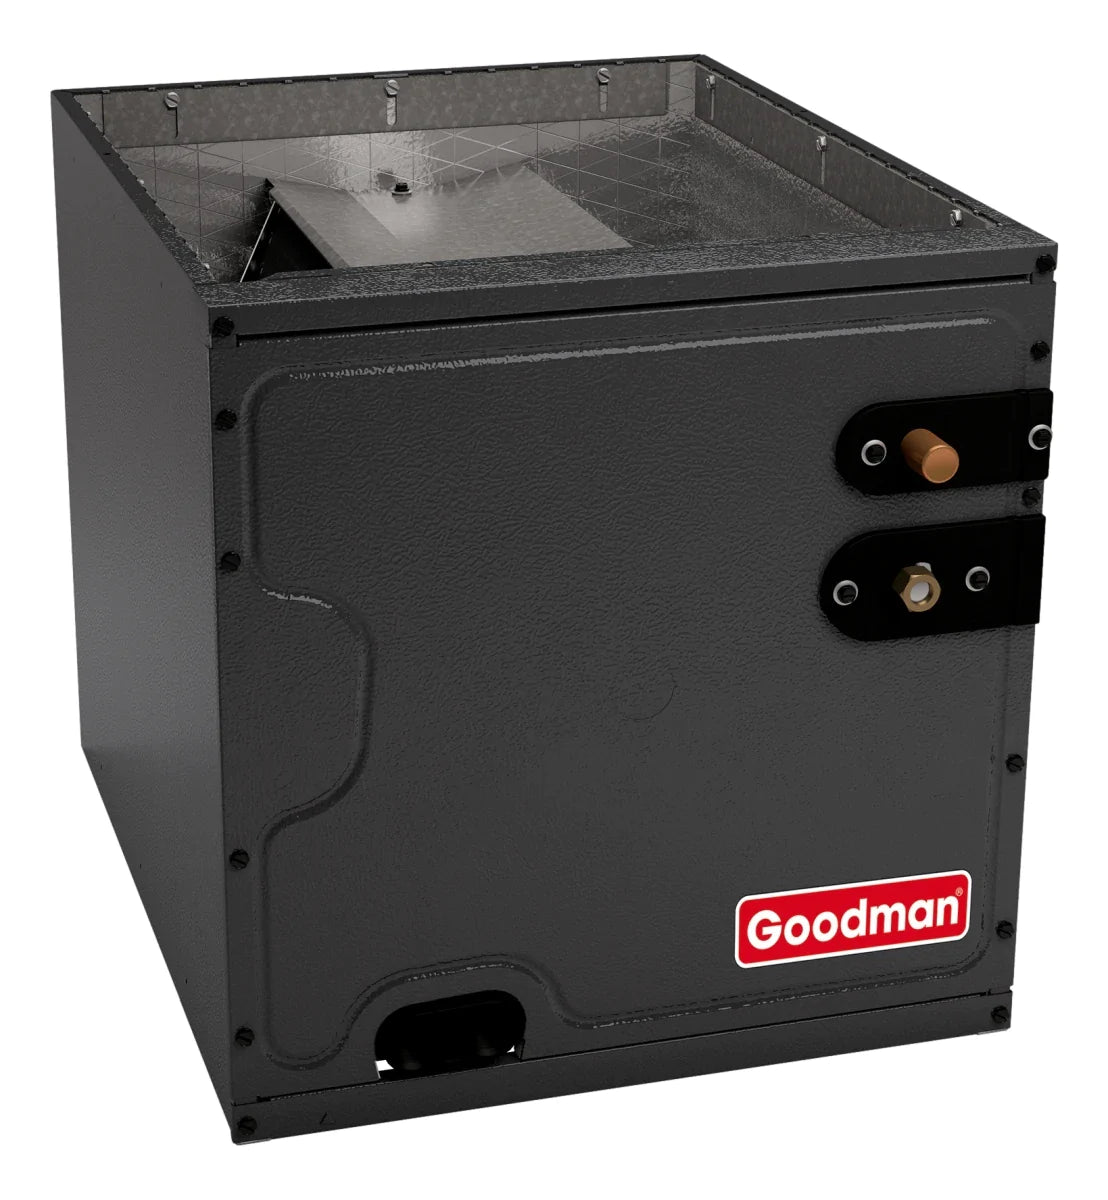 Goodman 2 TON 14.5 SEER2 Downflow AC system with 80% AFUE 40k BTU 2 stage Furnace (GSXN402410, CAPTA3022A4, GC9C800403AN)